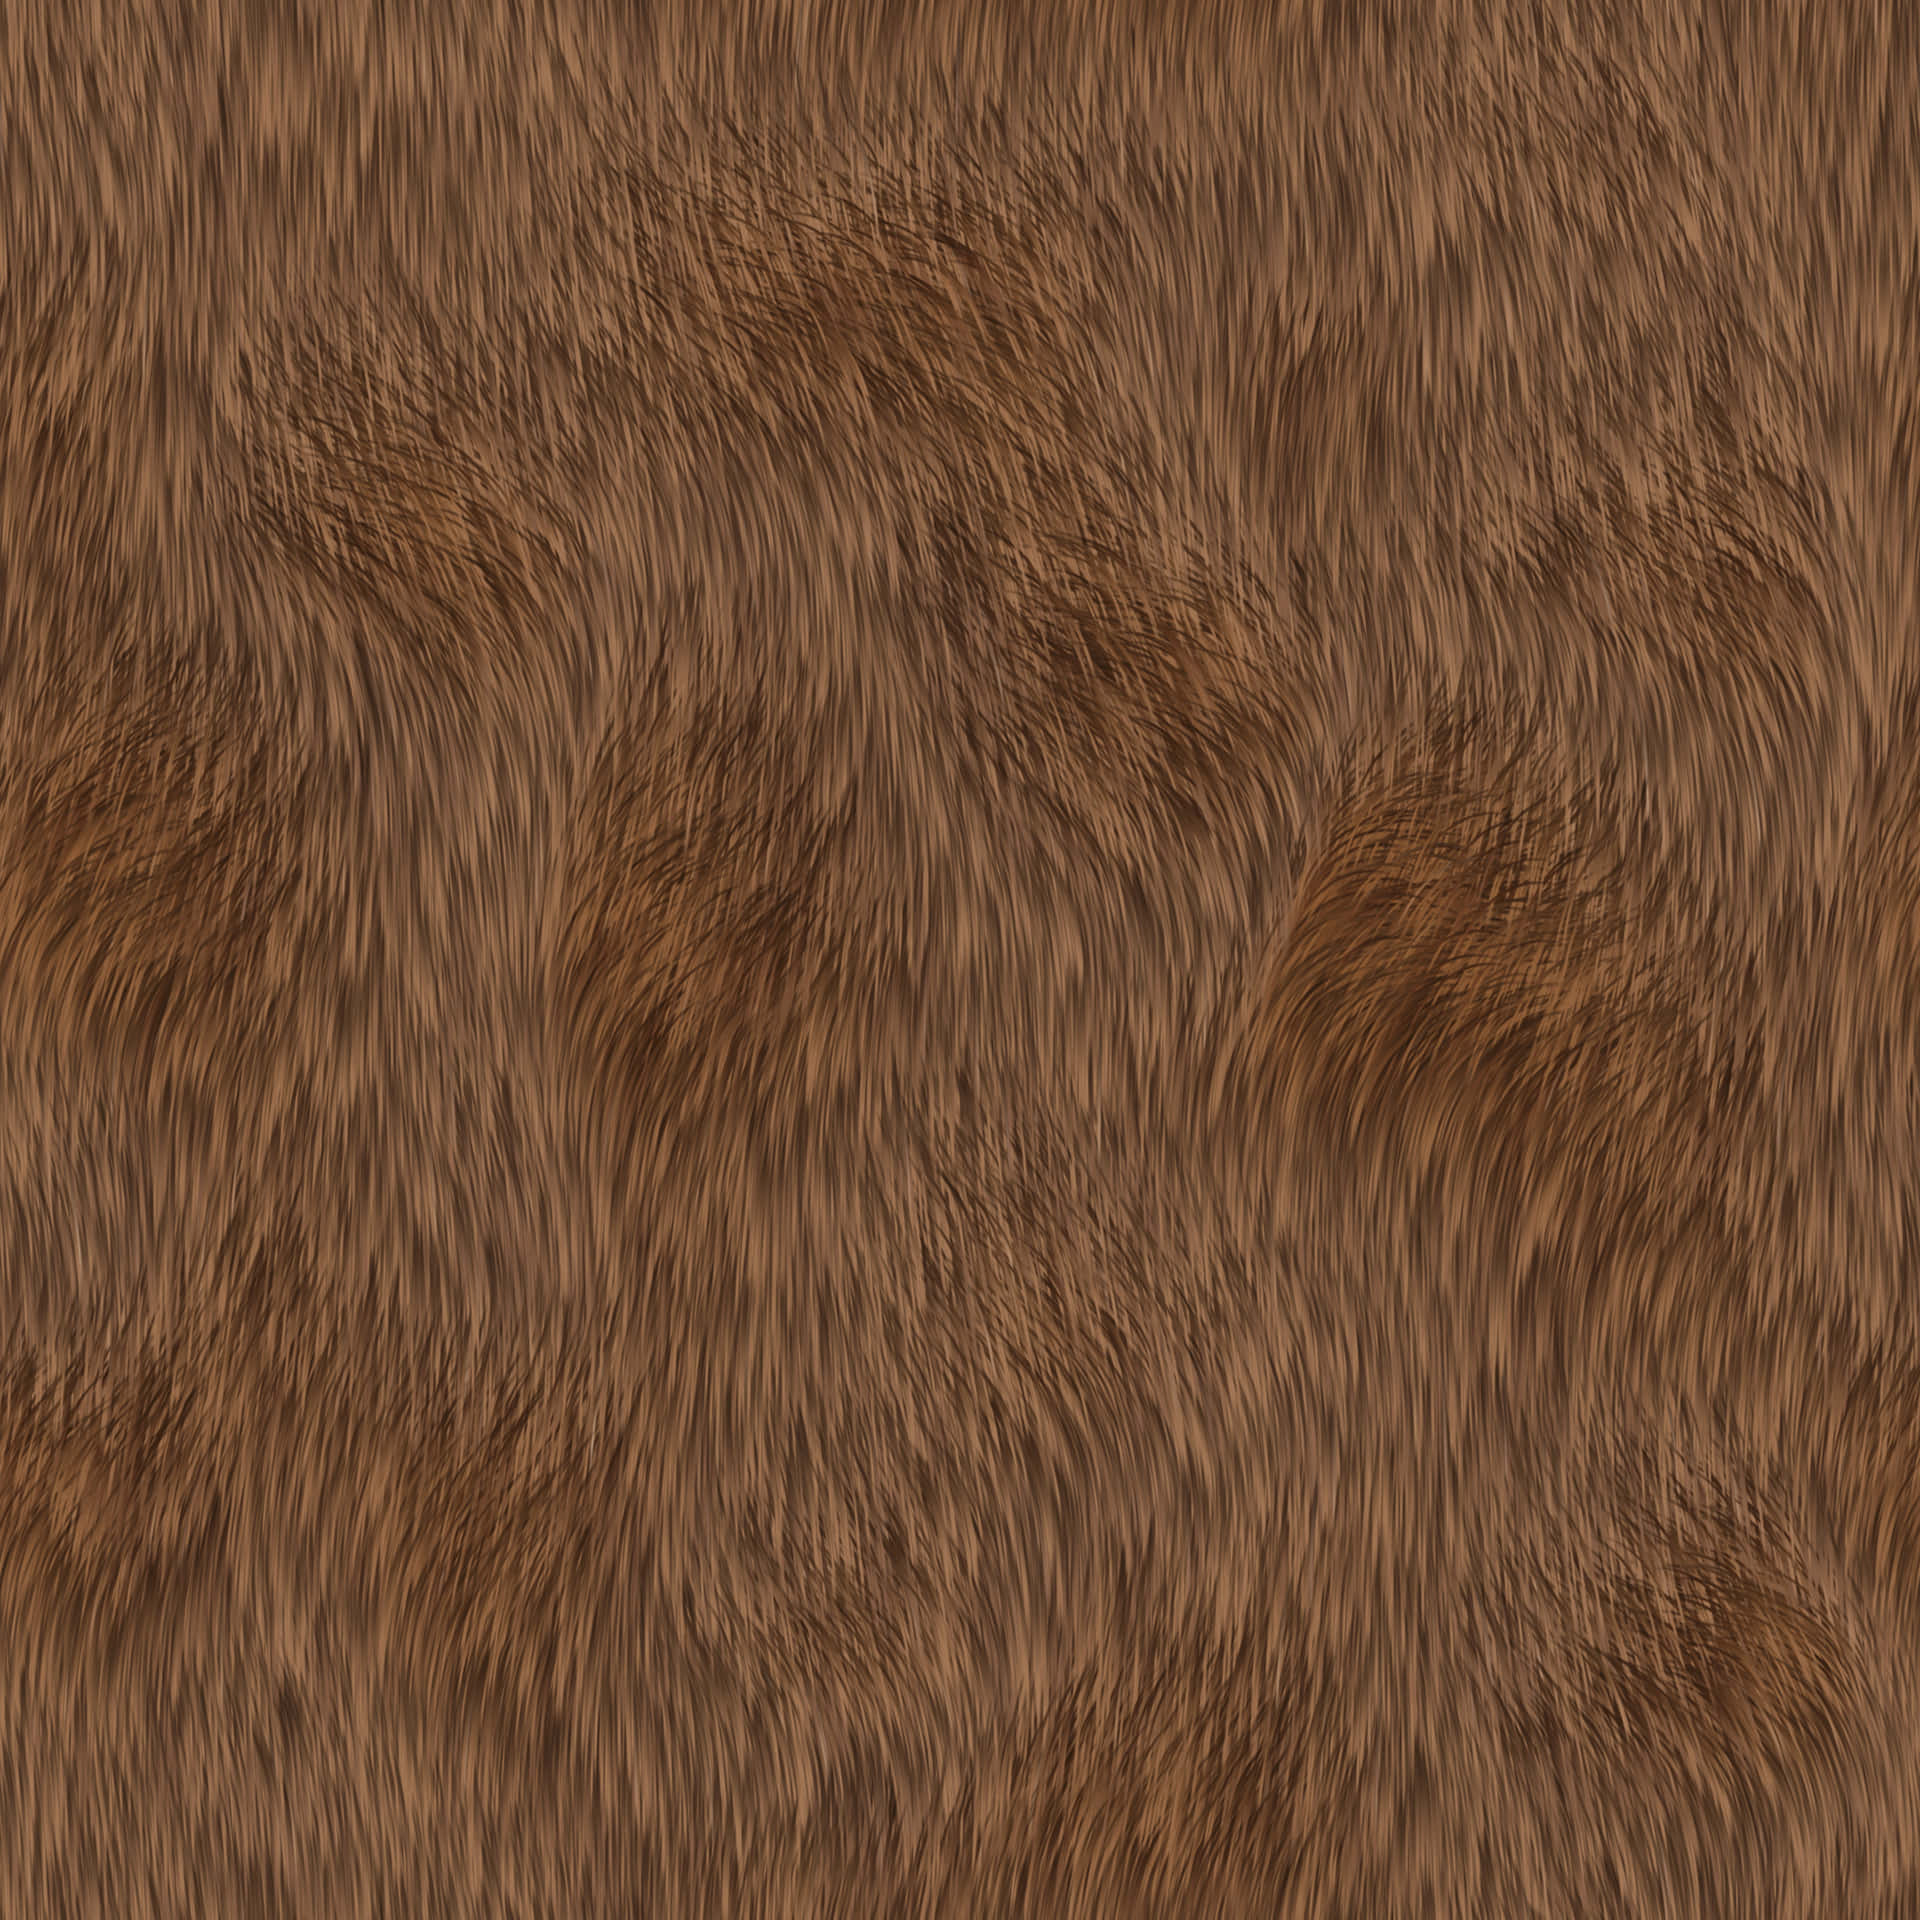 A close-up of a luxuriously soft animal fur